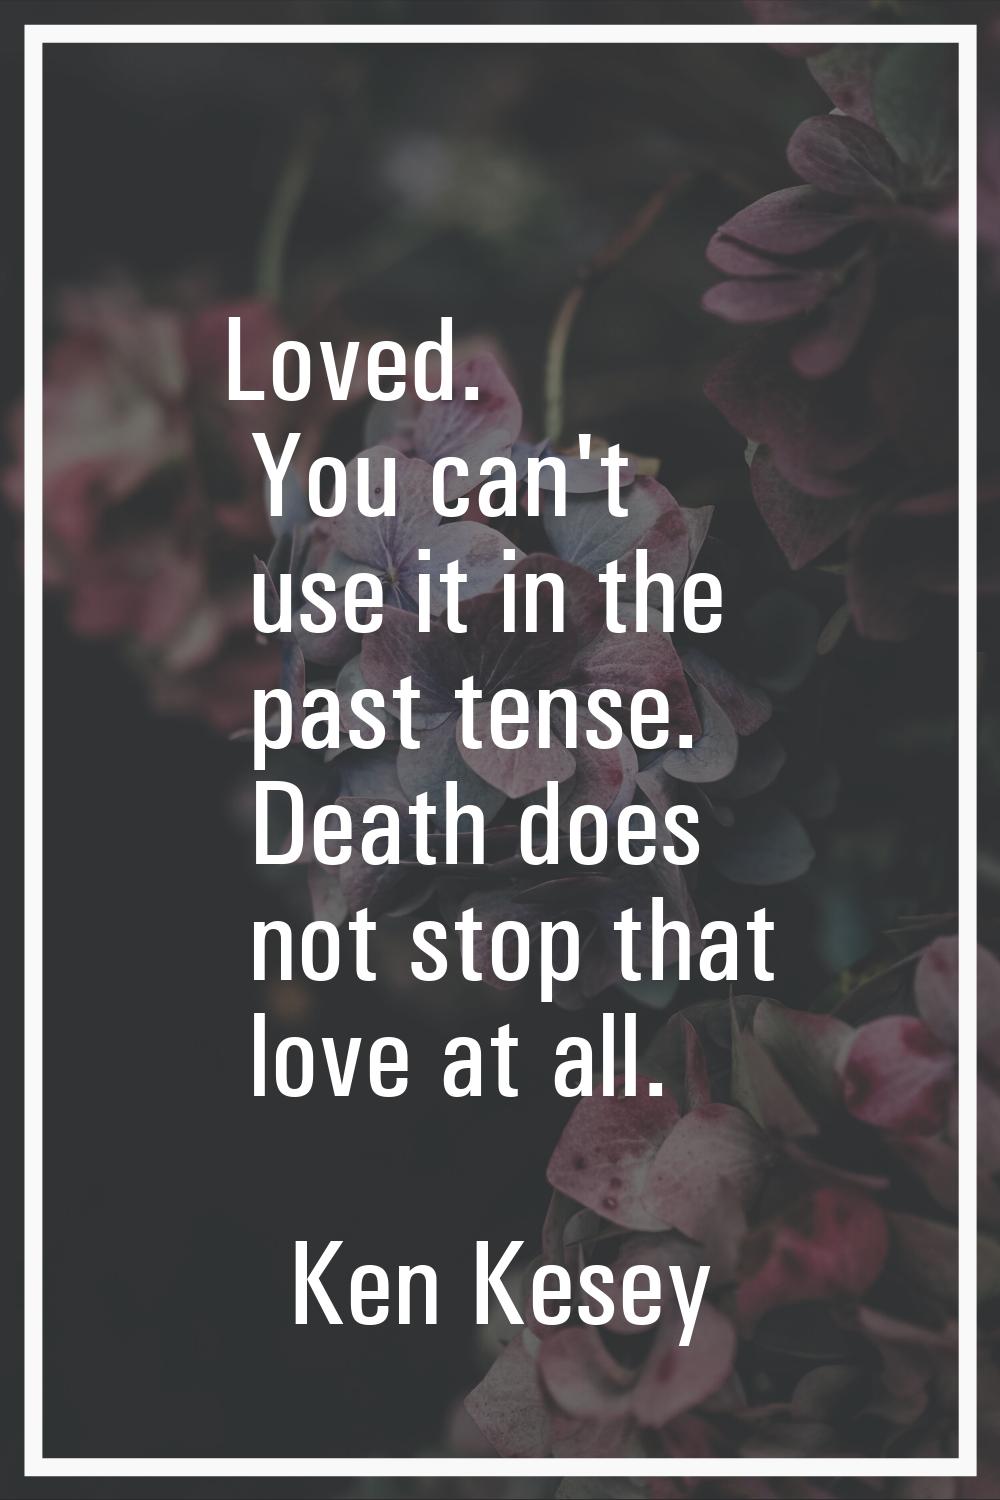 Loved. You can't use it in the past tense. Death does not stop that love at all.